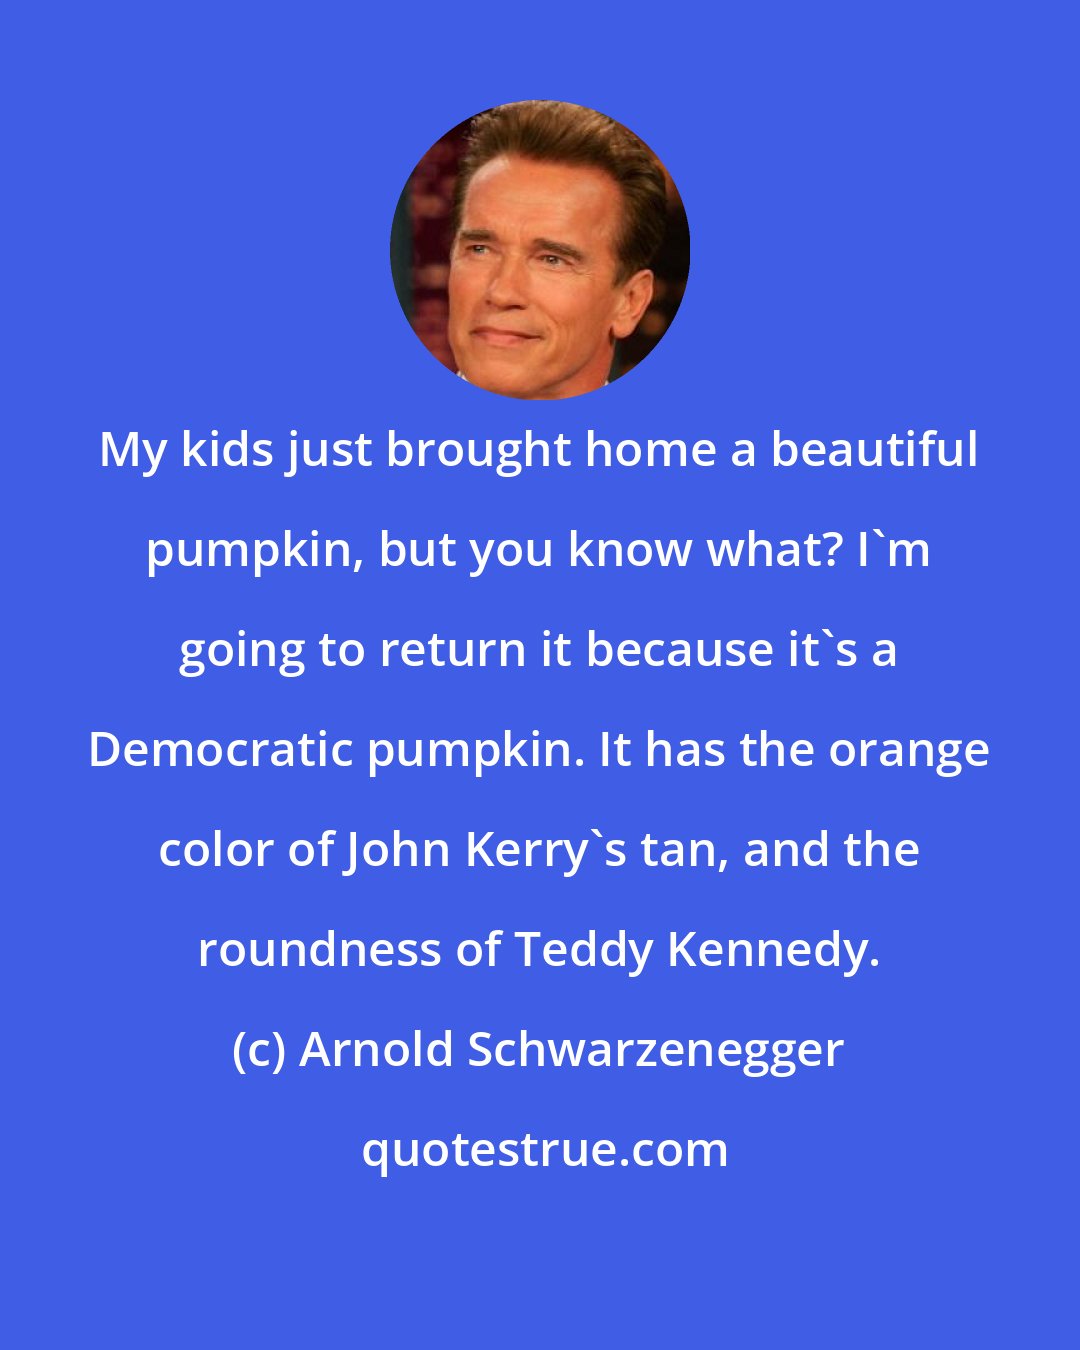 Arnold Schwarzenegger: My kids just brought home a beautiful pumpkin, but you know what? I'm going to return it because it's a Democratic pumpkin. It has the orange color of John Kerry's tan, and the roundness of Teddy Kennedy.